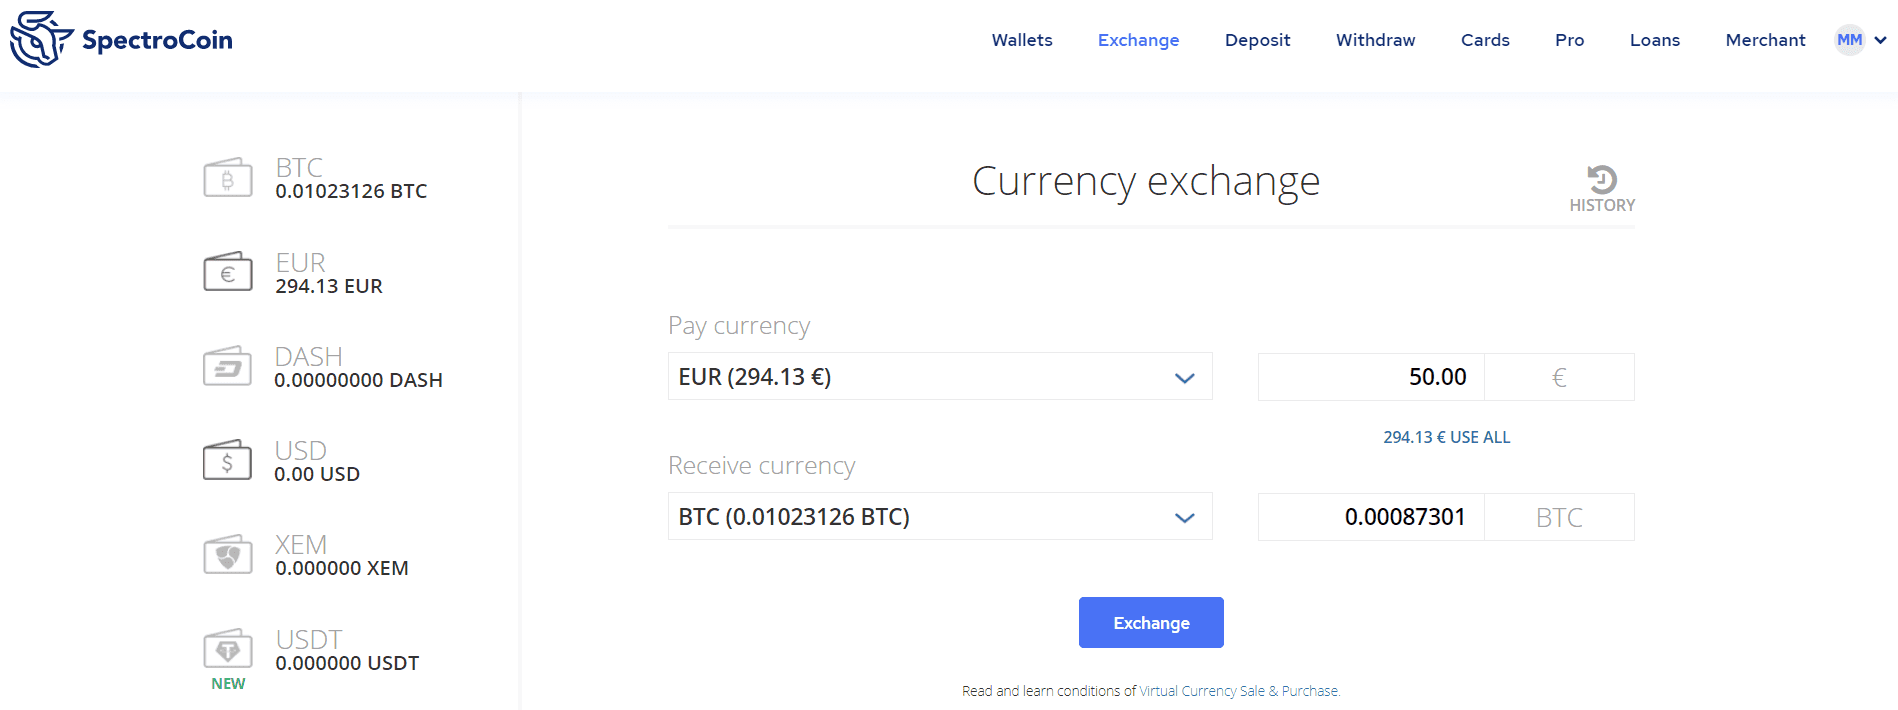 To buy Bitcoin at SpectroCoin, insert the EUR amount you would like to sell for BTC.